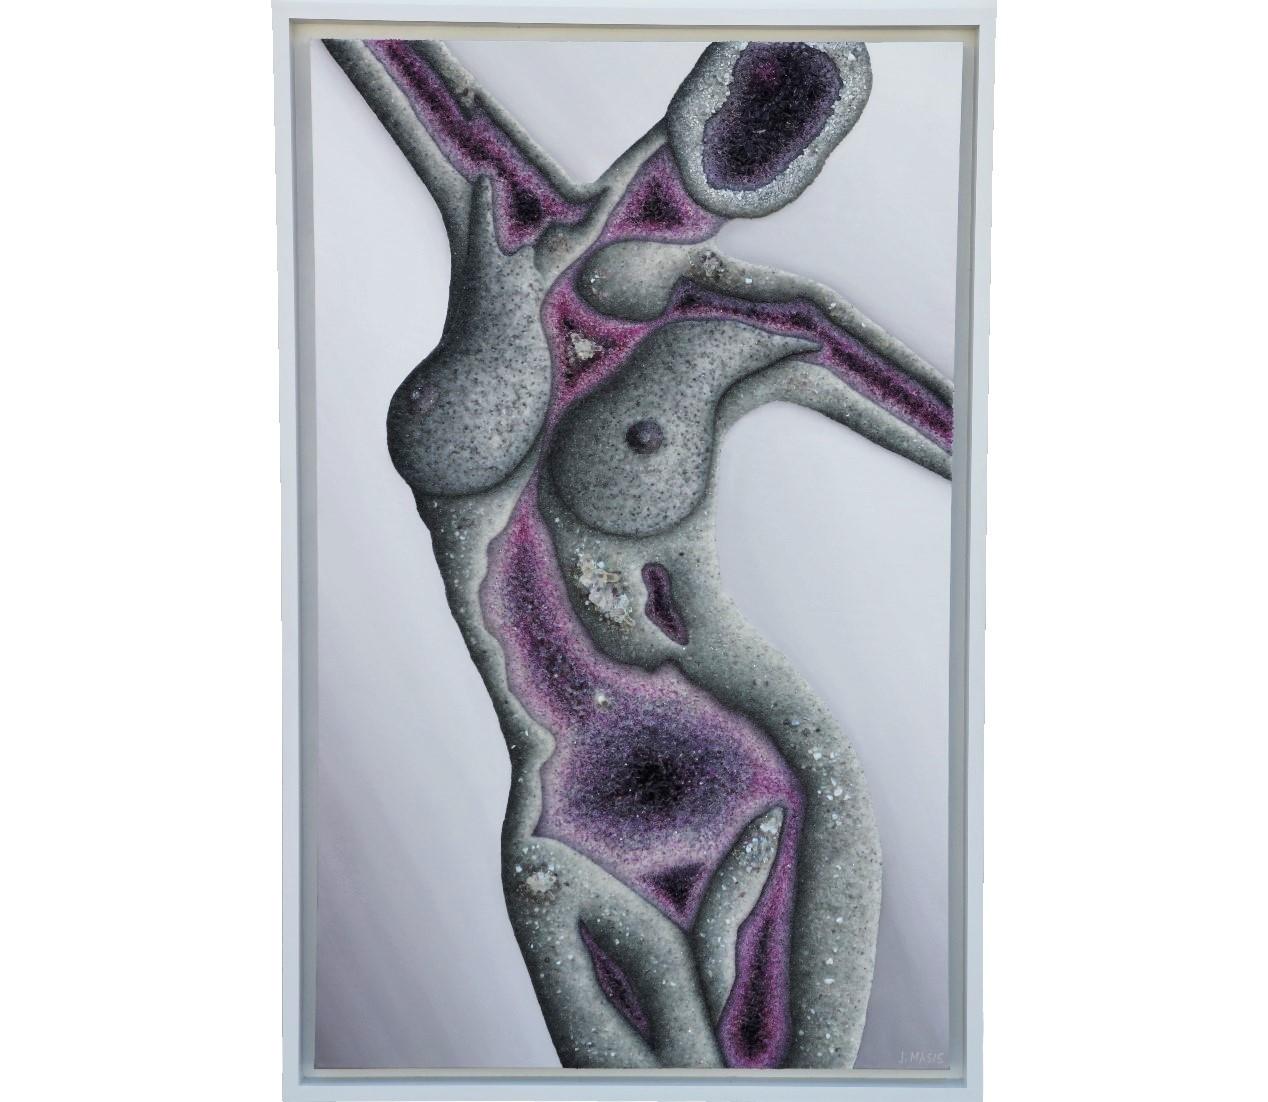 Jose Masis-Oliver Nude Painting - "Amethyst Goddess" Pop Art Nude Portrait Painting in Crushed Glass and Minerals 